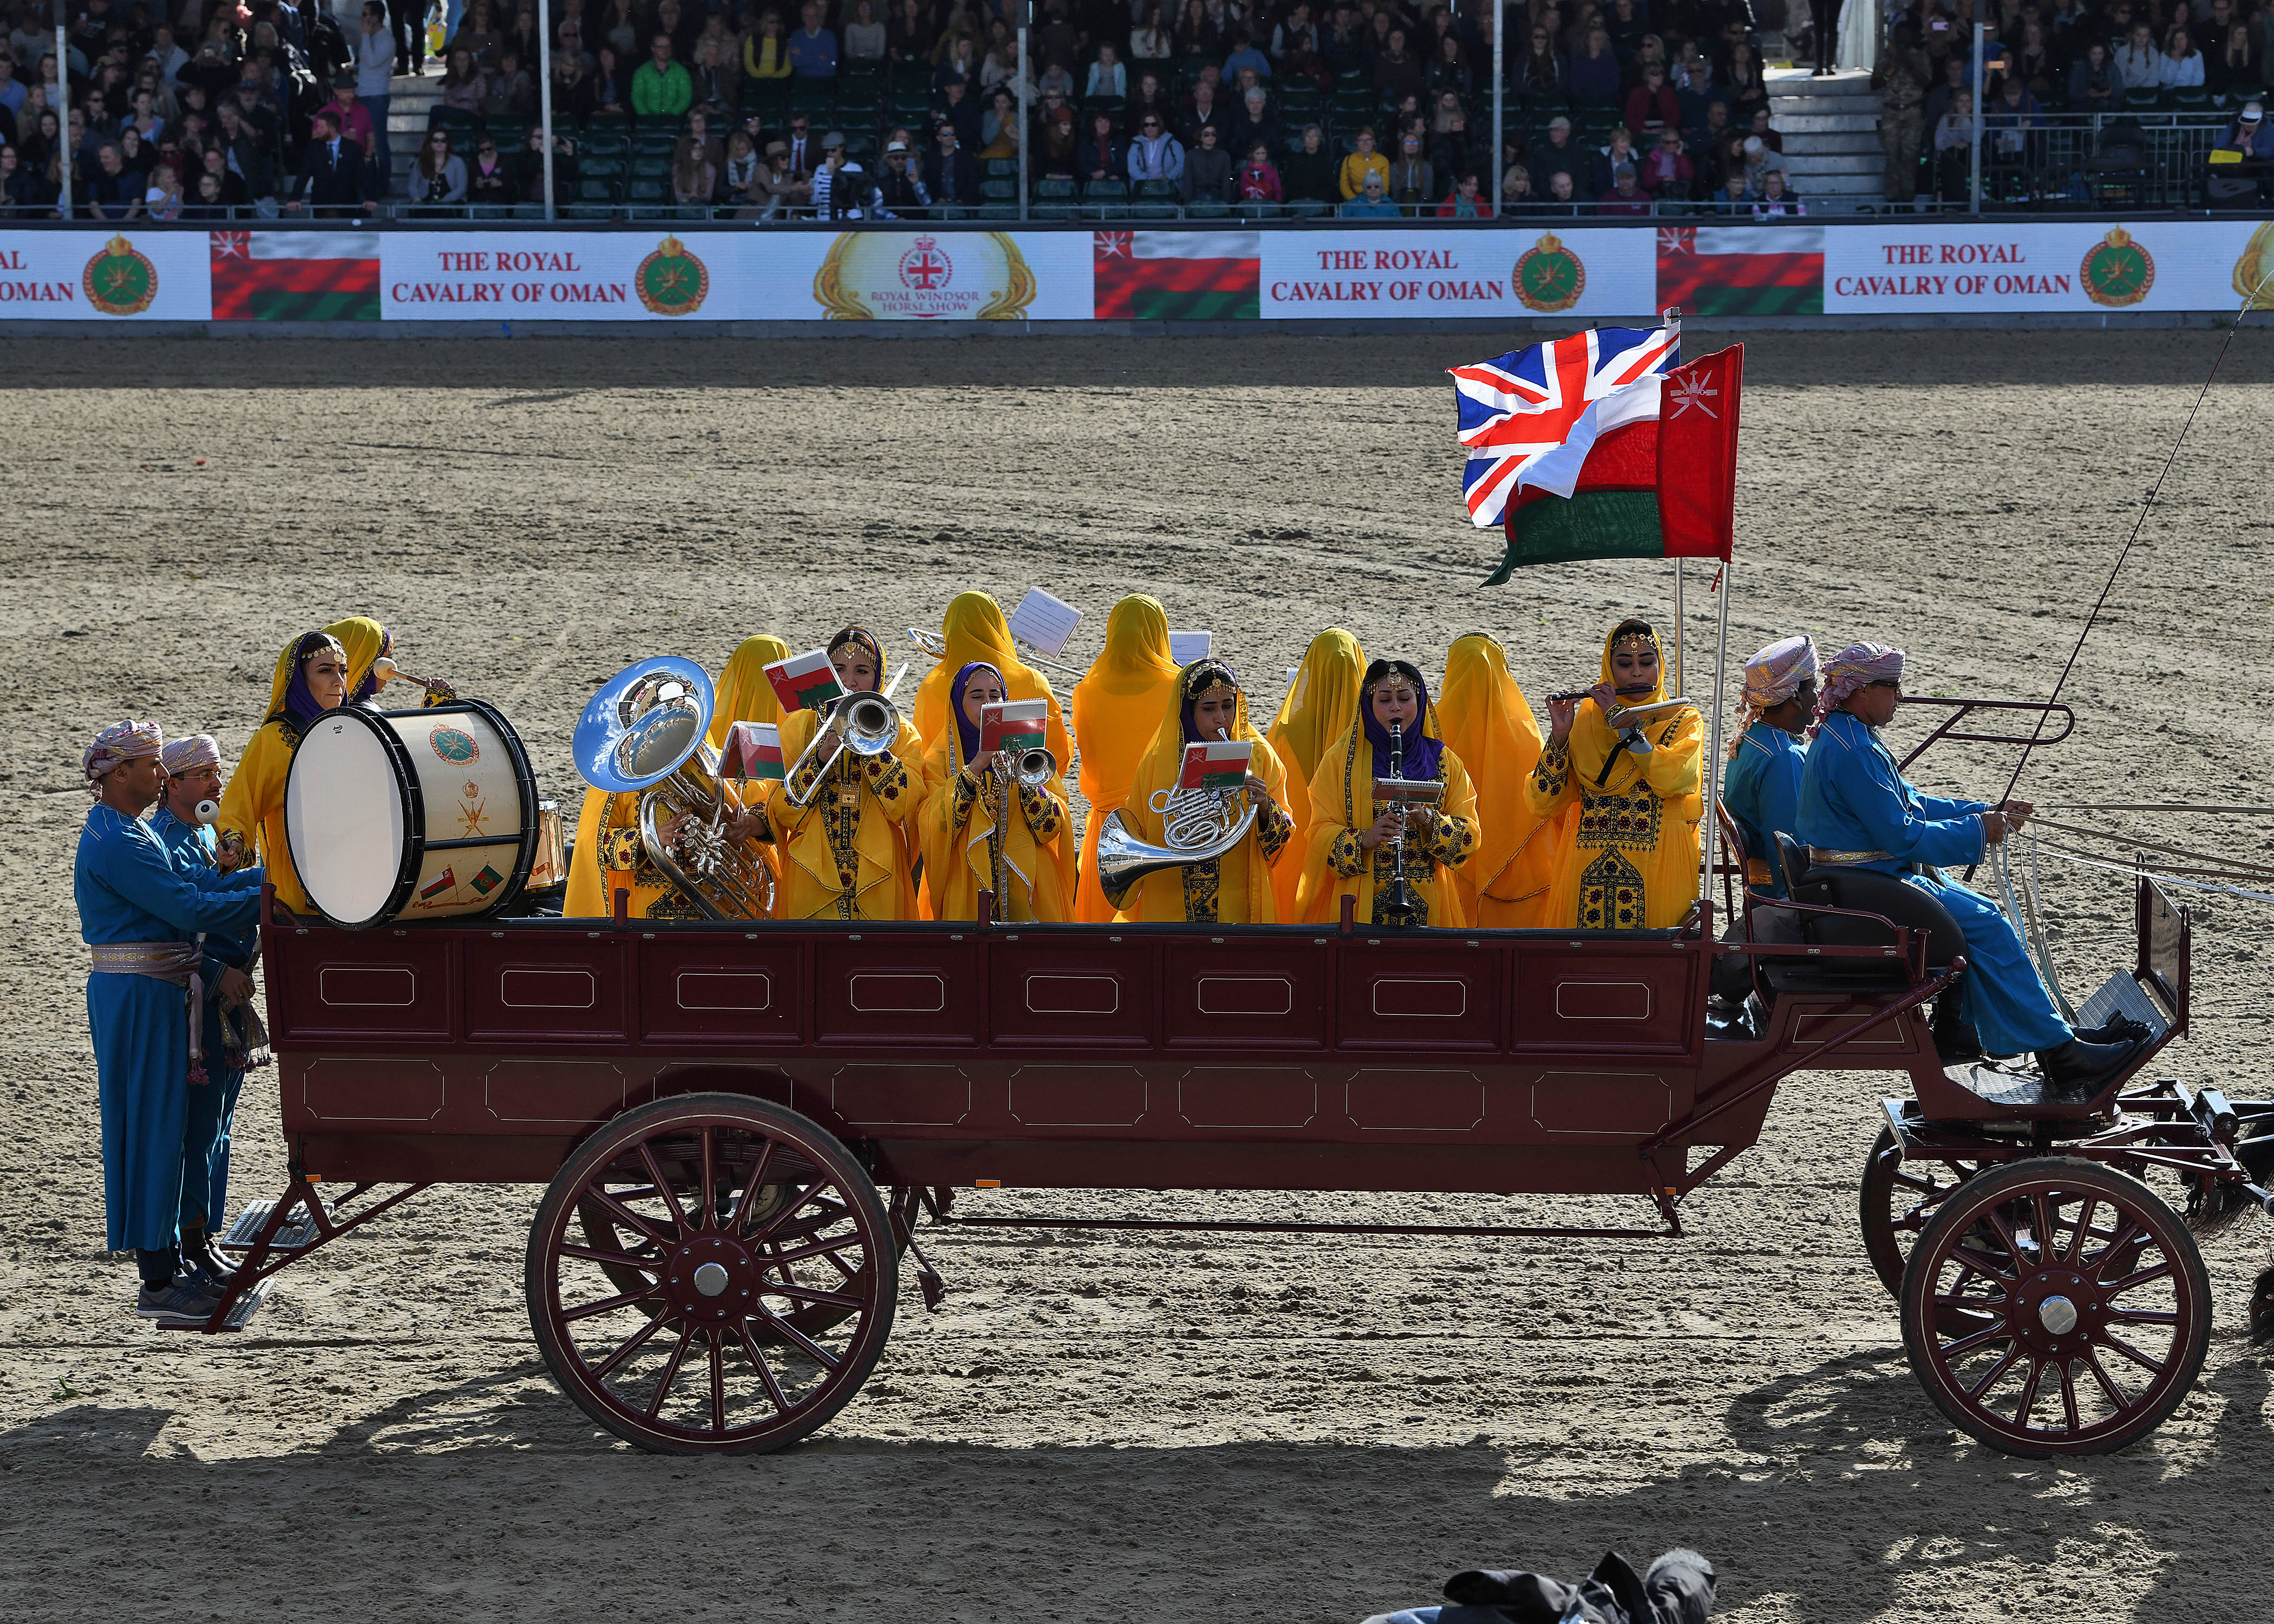 Royal Cavalry shows equestrian skills at Windsor event